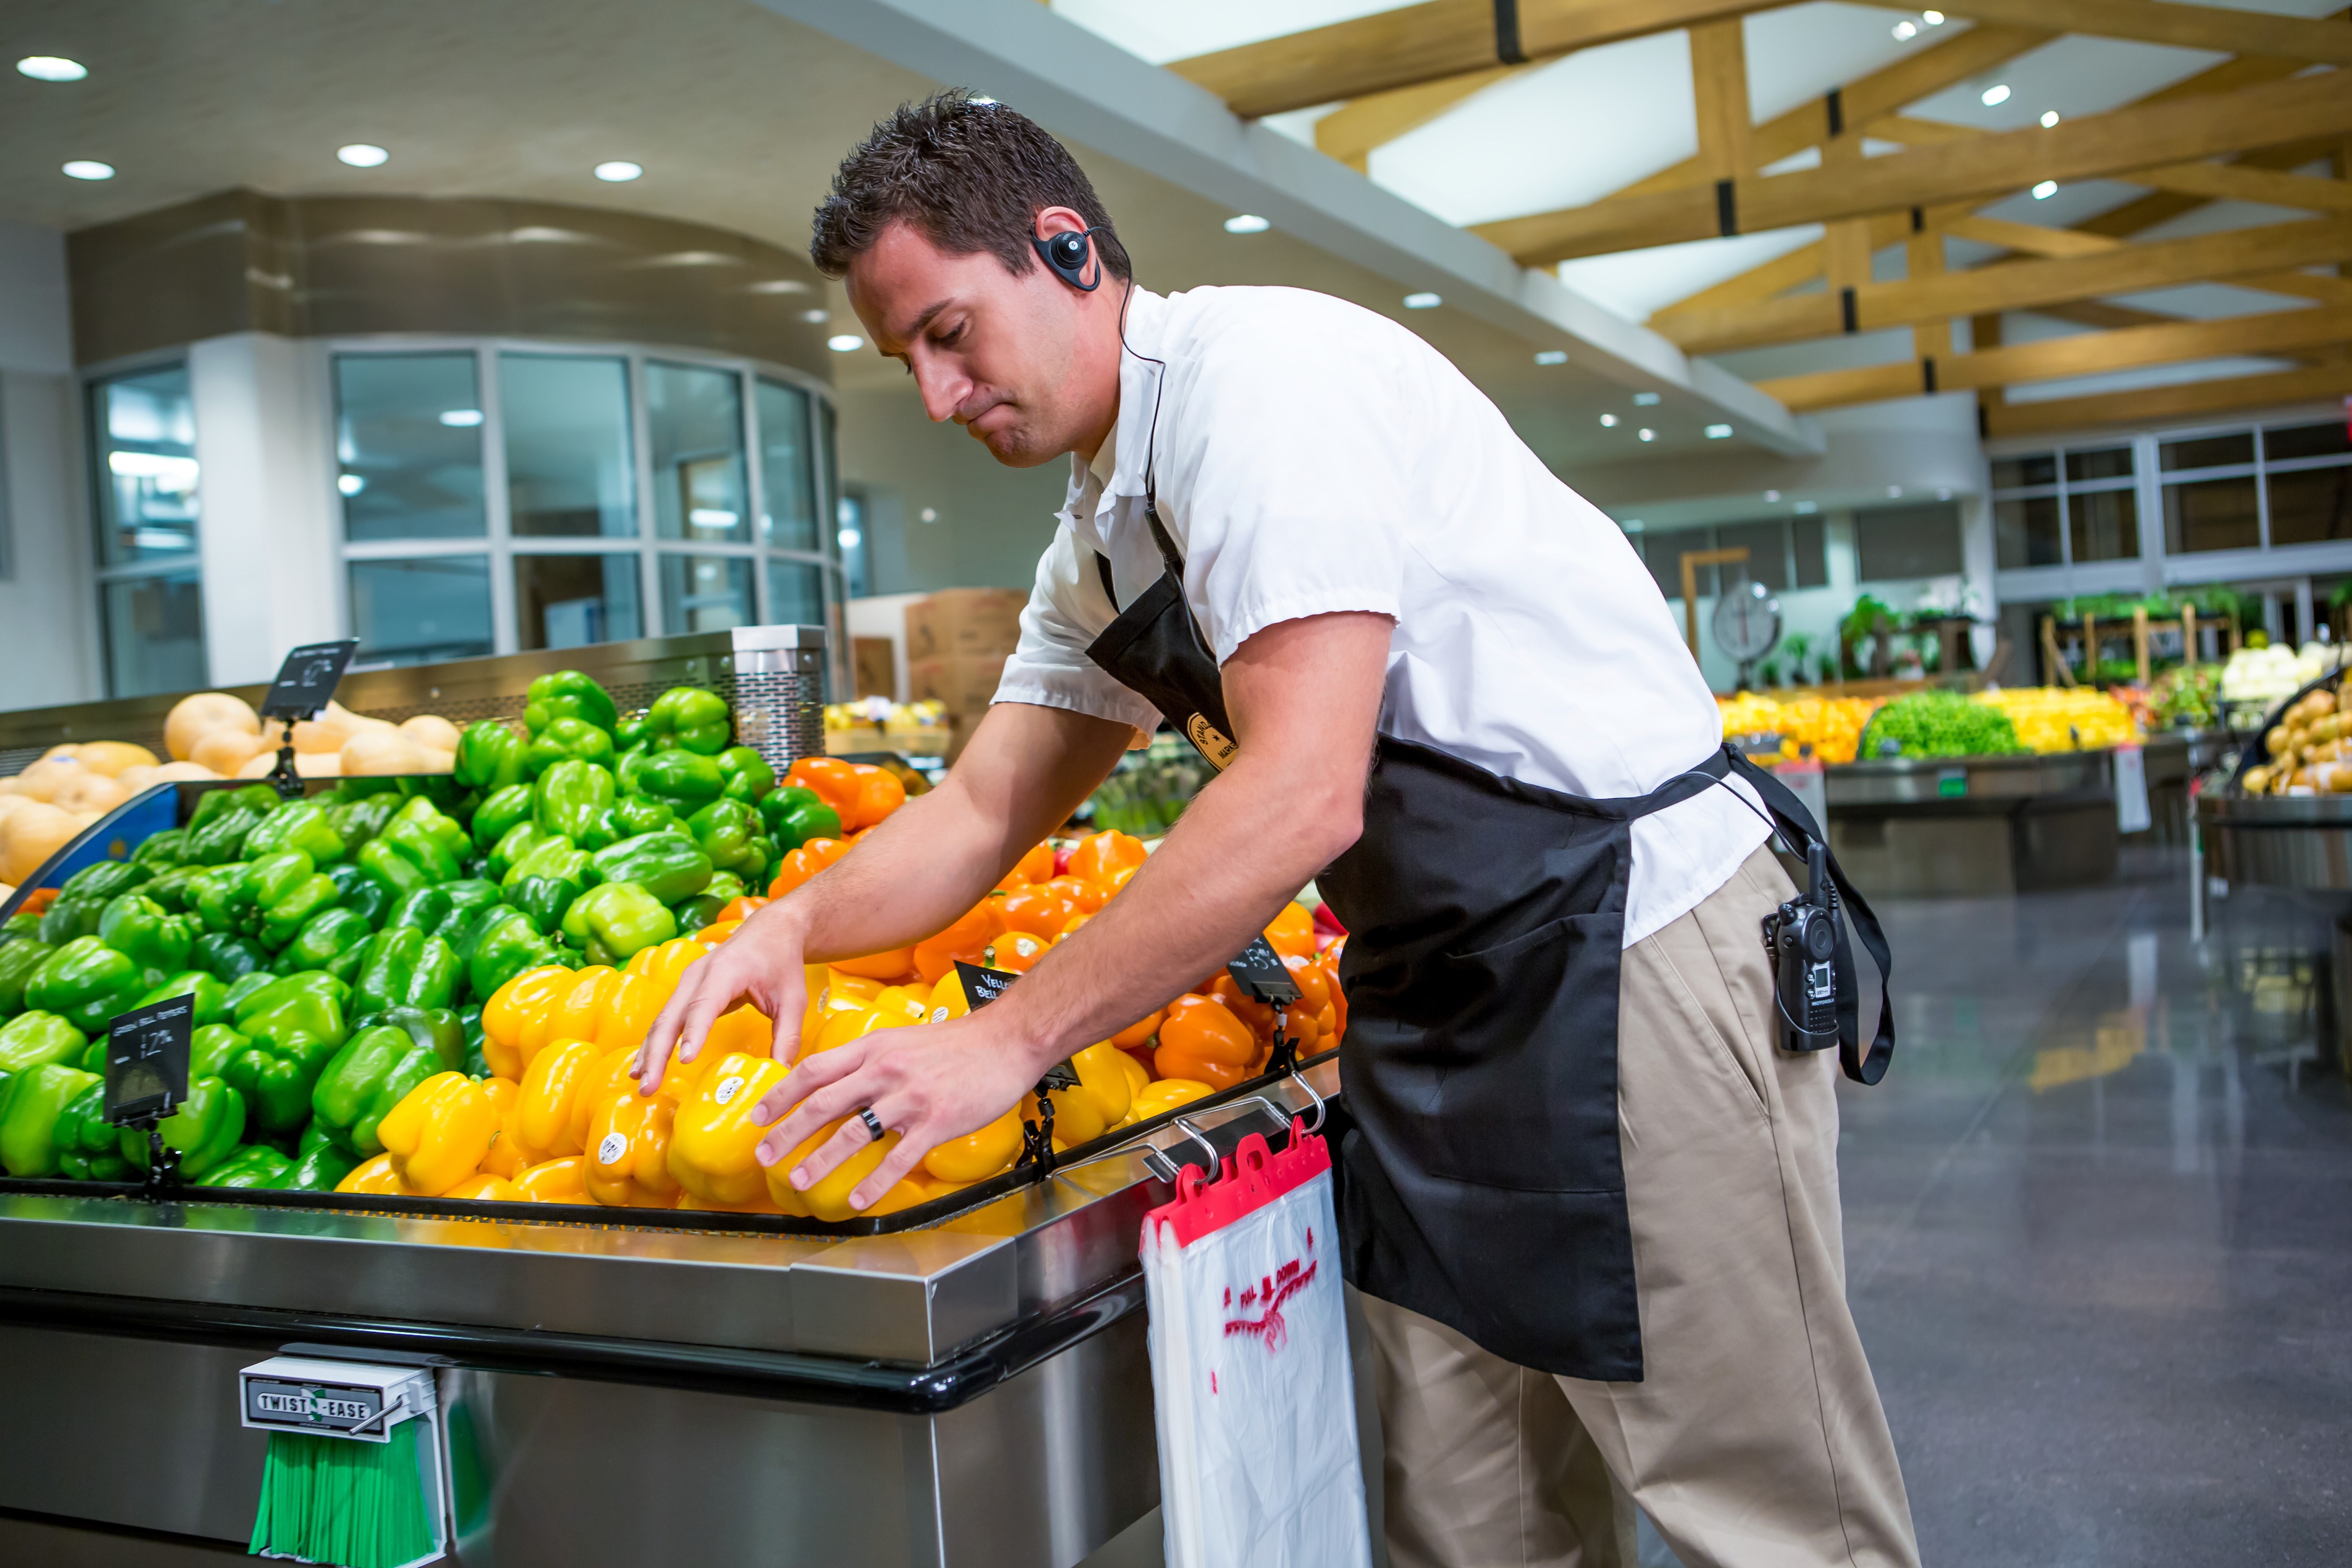 Grocery employees need to communicate about operational issues, suspicious activity, hazards such as wet floors and broken glass, and even lost-child alerts and medical emergencies.